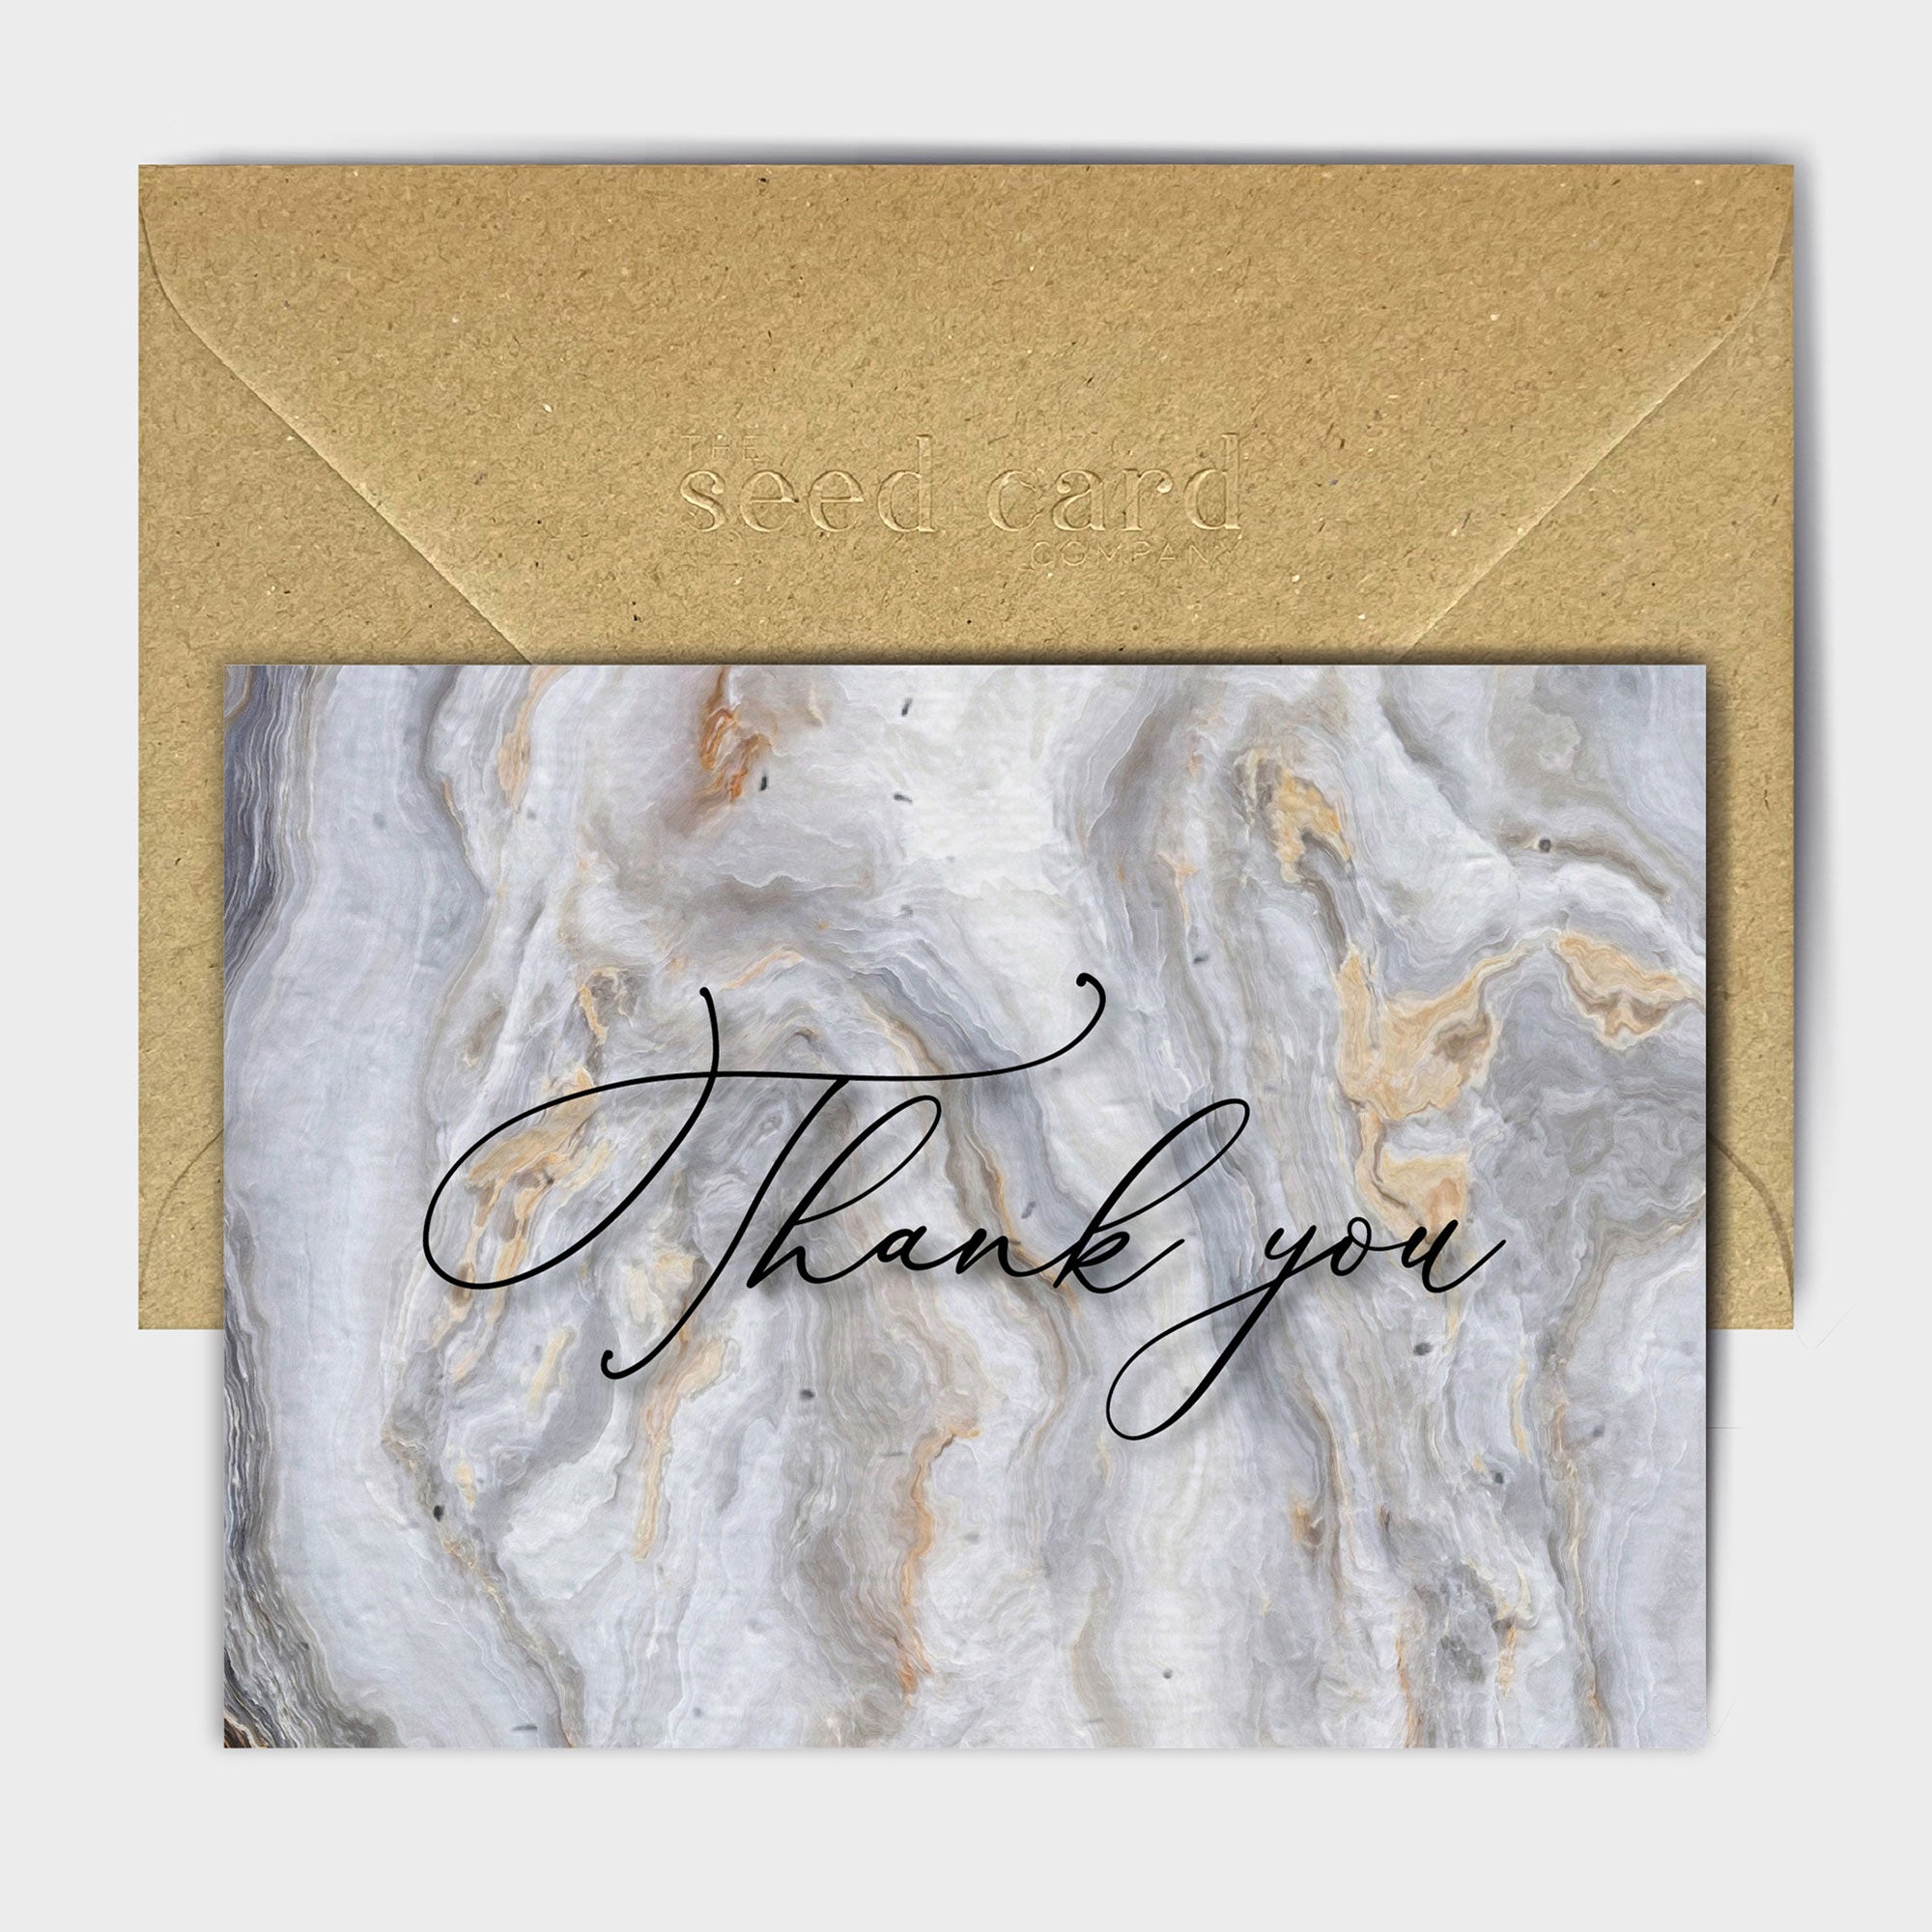 Shop online Thank You Darling - 100% biodegradable seed-embedded cards Shop -The Seed Card Company